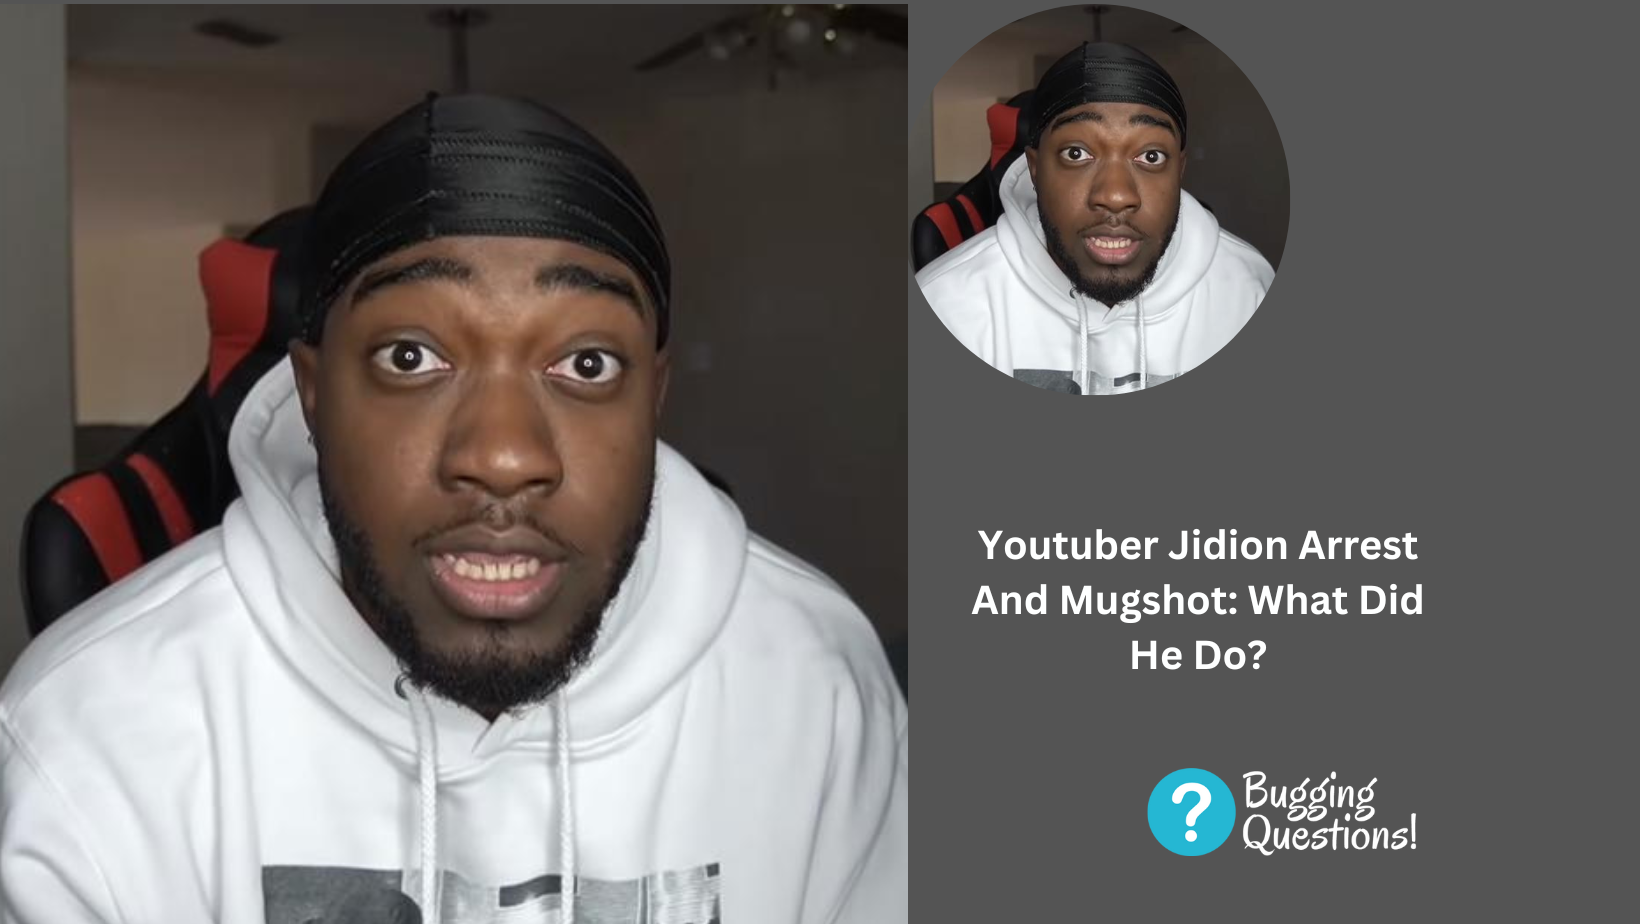 Youtuber Jidion Arrest And Mugshot: What Did He Do?